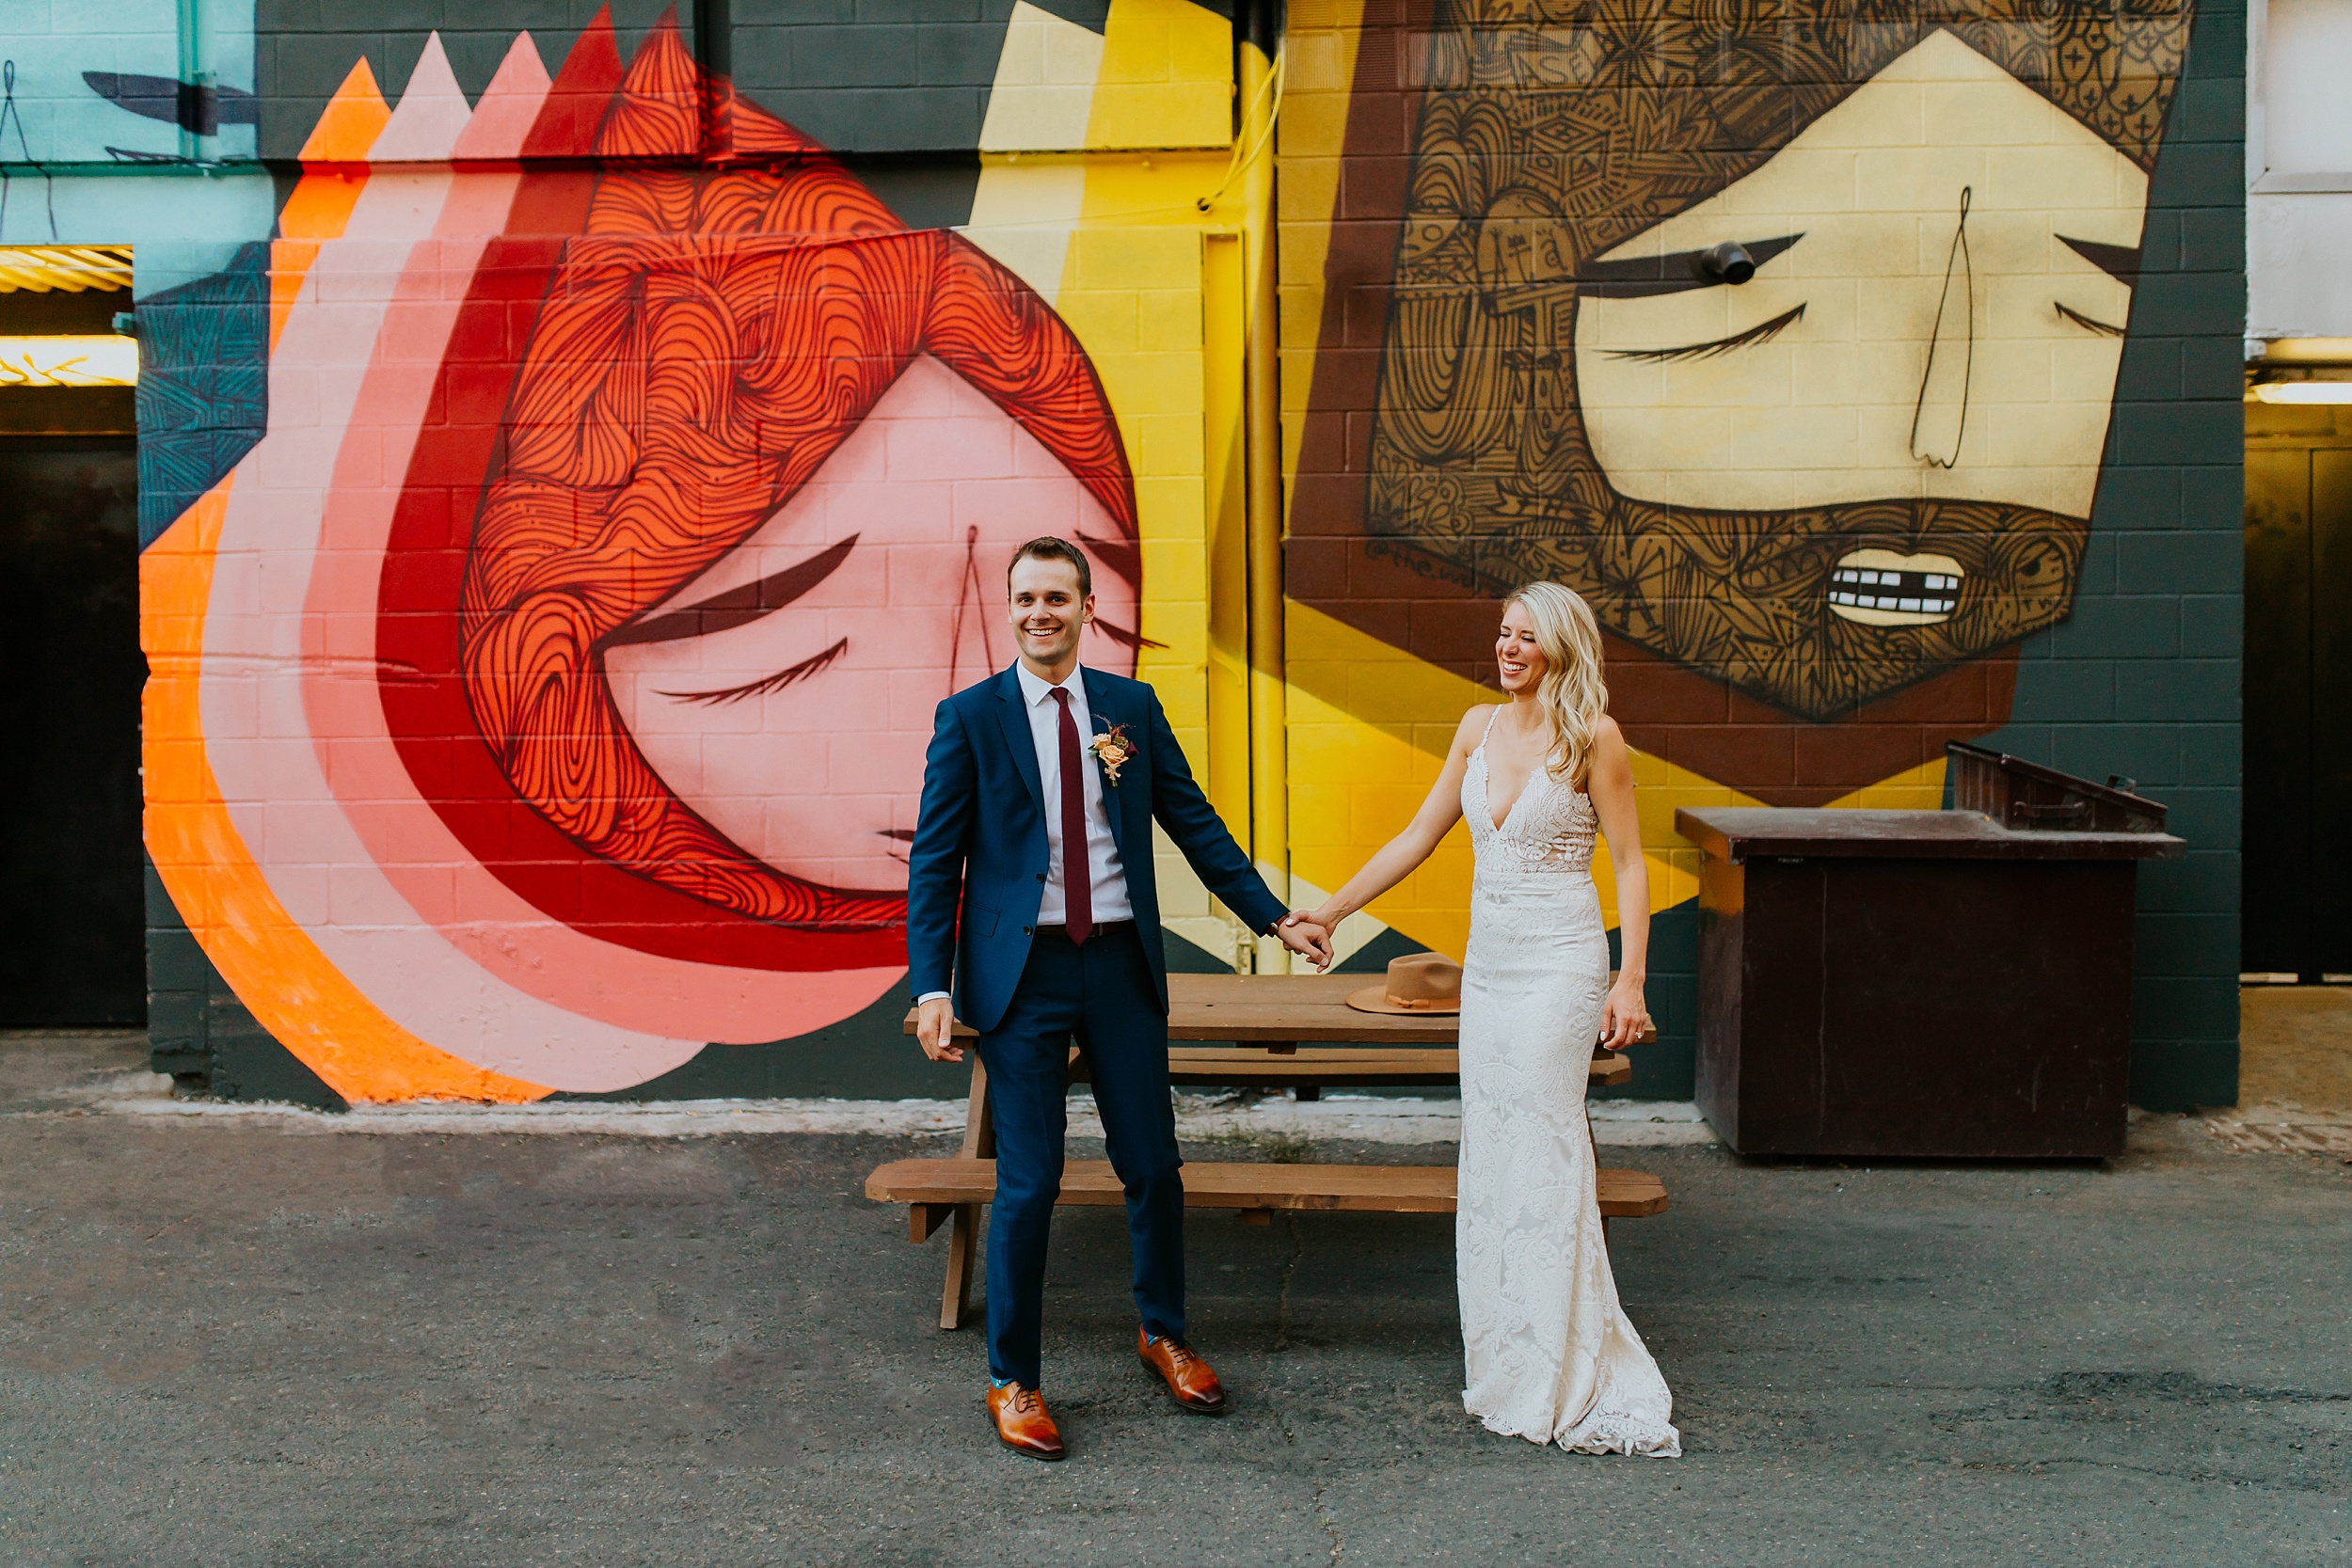 Bride and groom's elopement in the city with street murals!